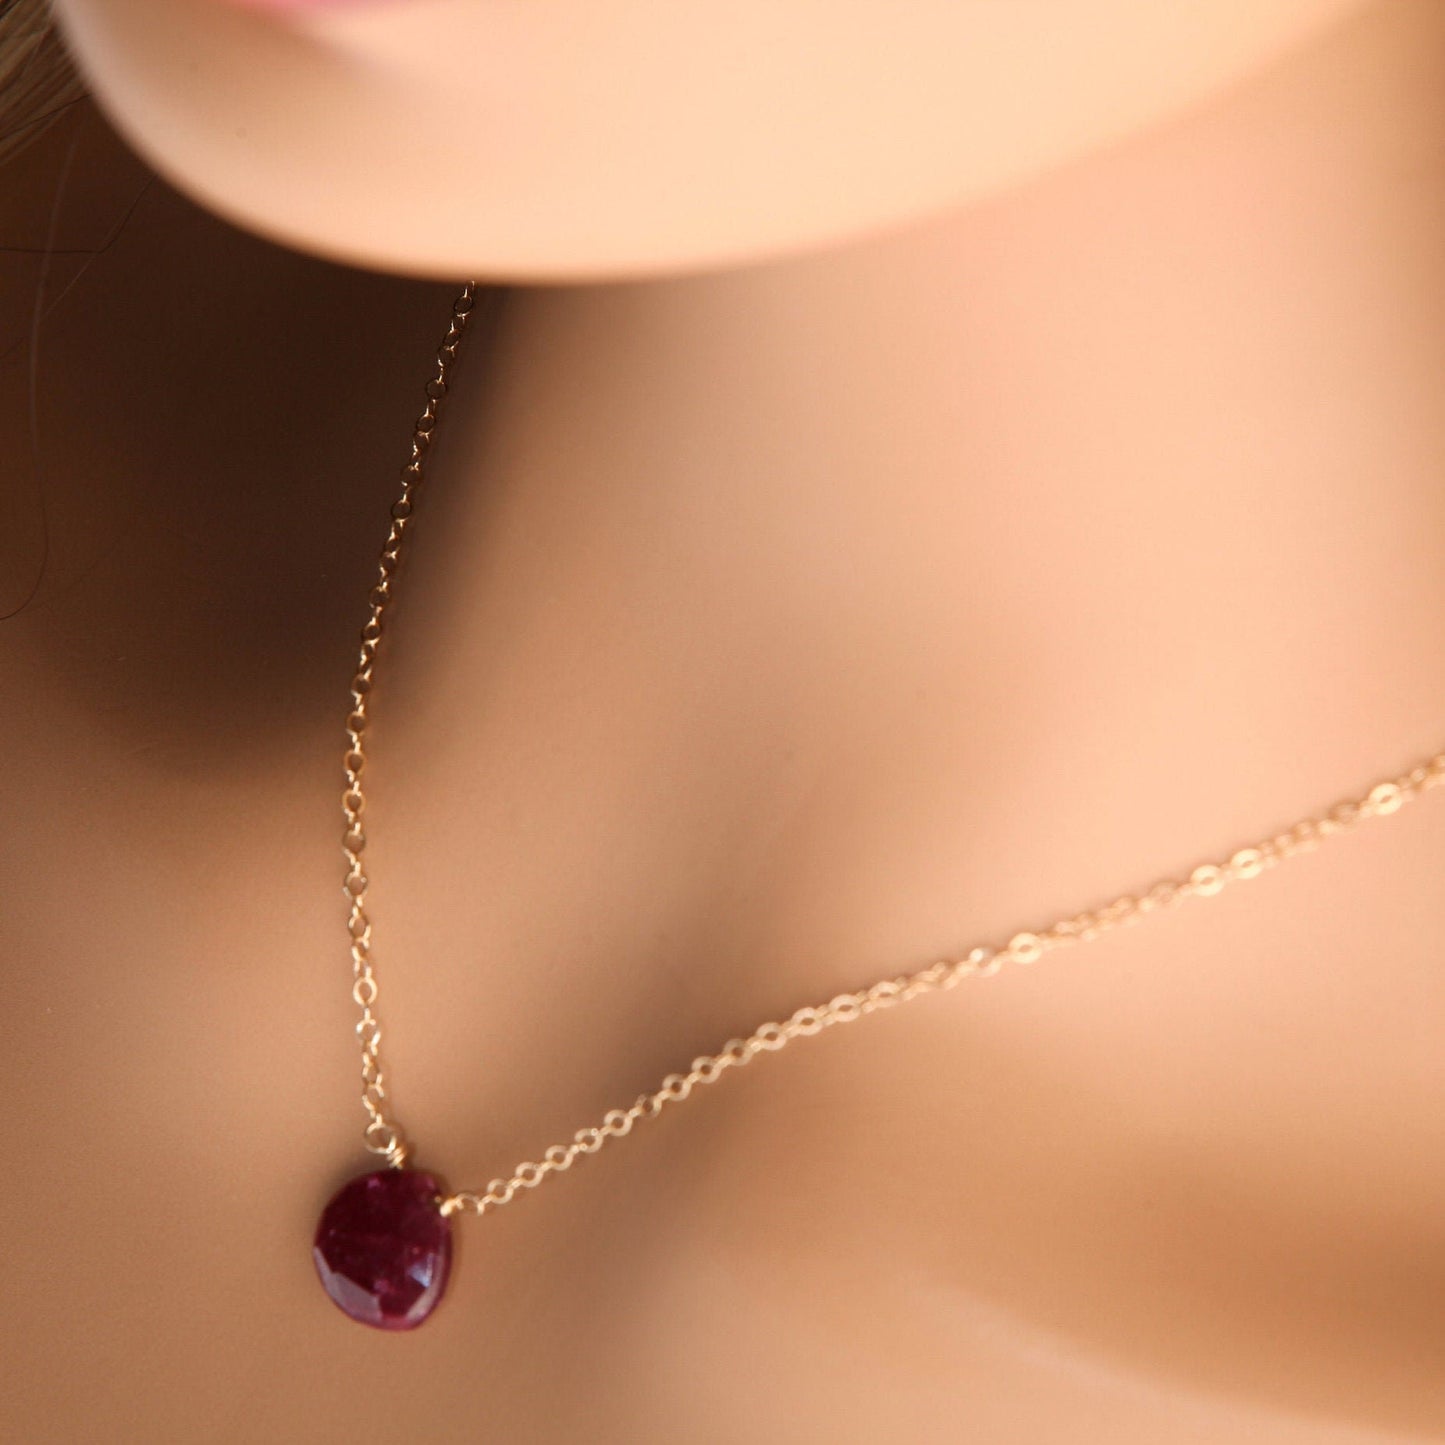 Ruby Necklace Set, Genuine Ruby Faceted 12mm Heart Briolette Teardrop Earrings and Necklace in 14K Gold Filled Cable Chain & Kidney Earwire